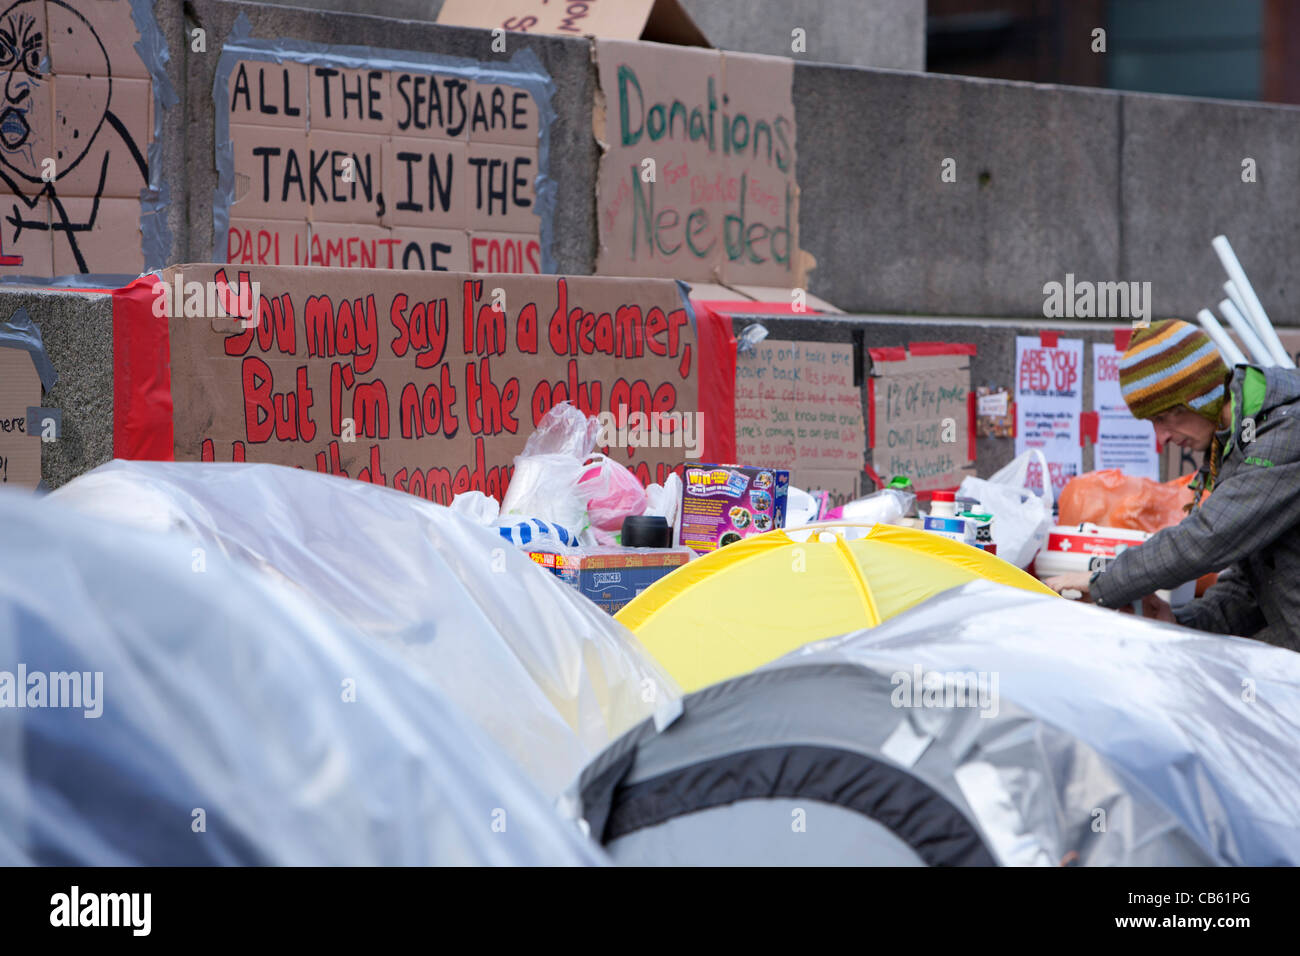 Occupy Liverpool demonstration Stock Photo